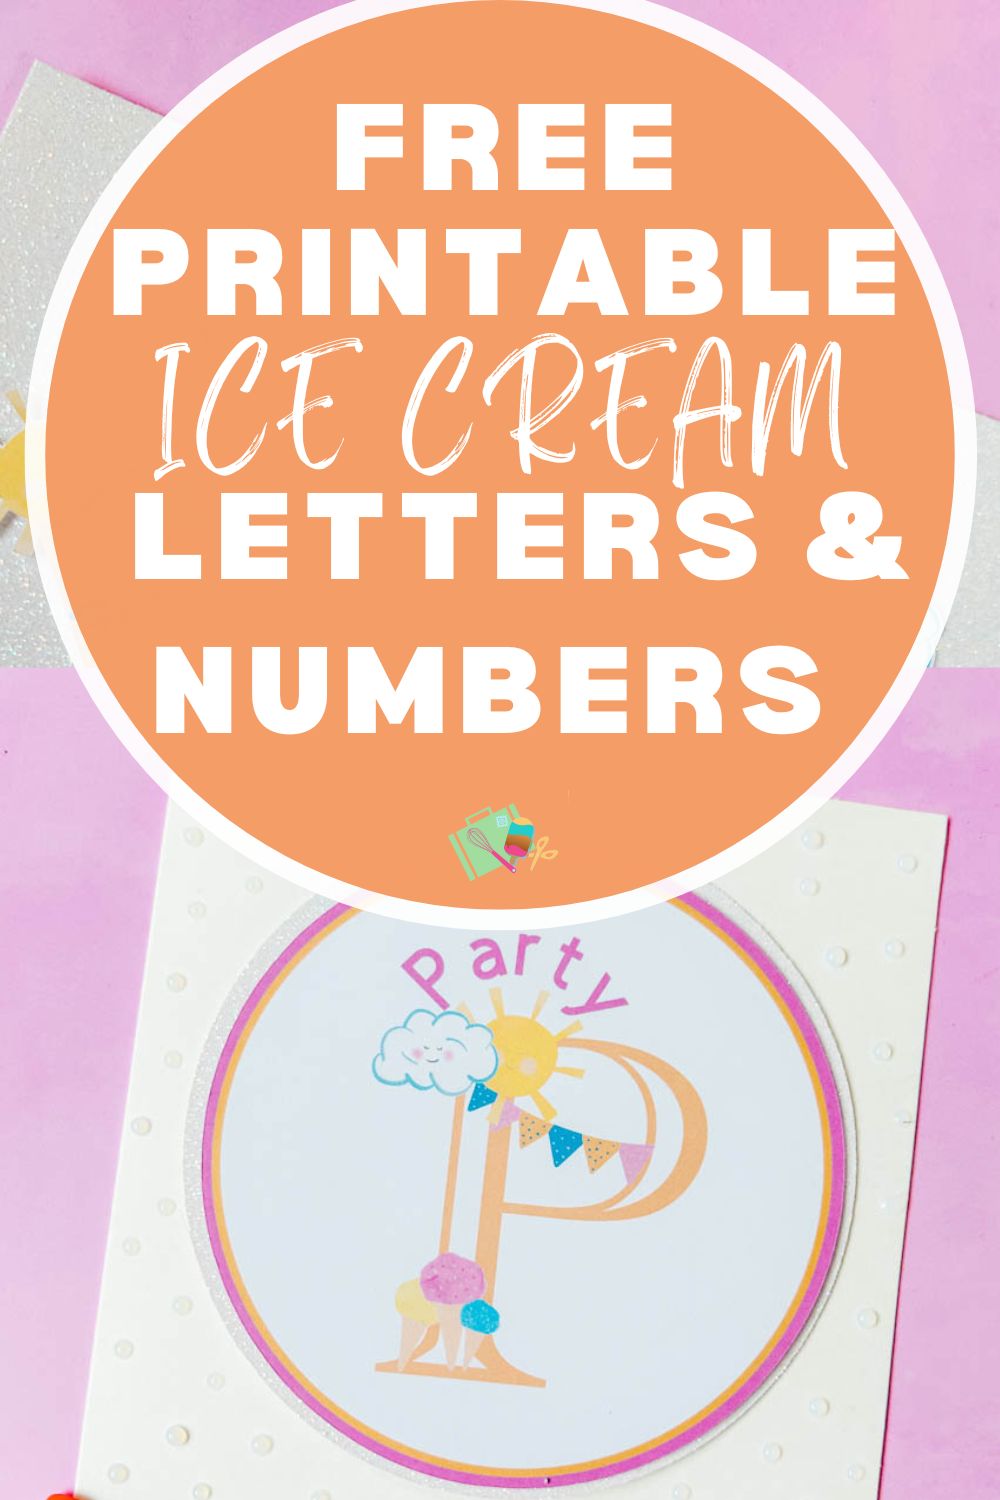 Free printable Ice Cream letters and Numbers for Cricut and Silhouette